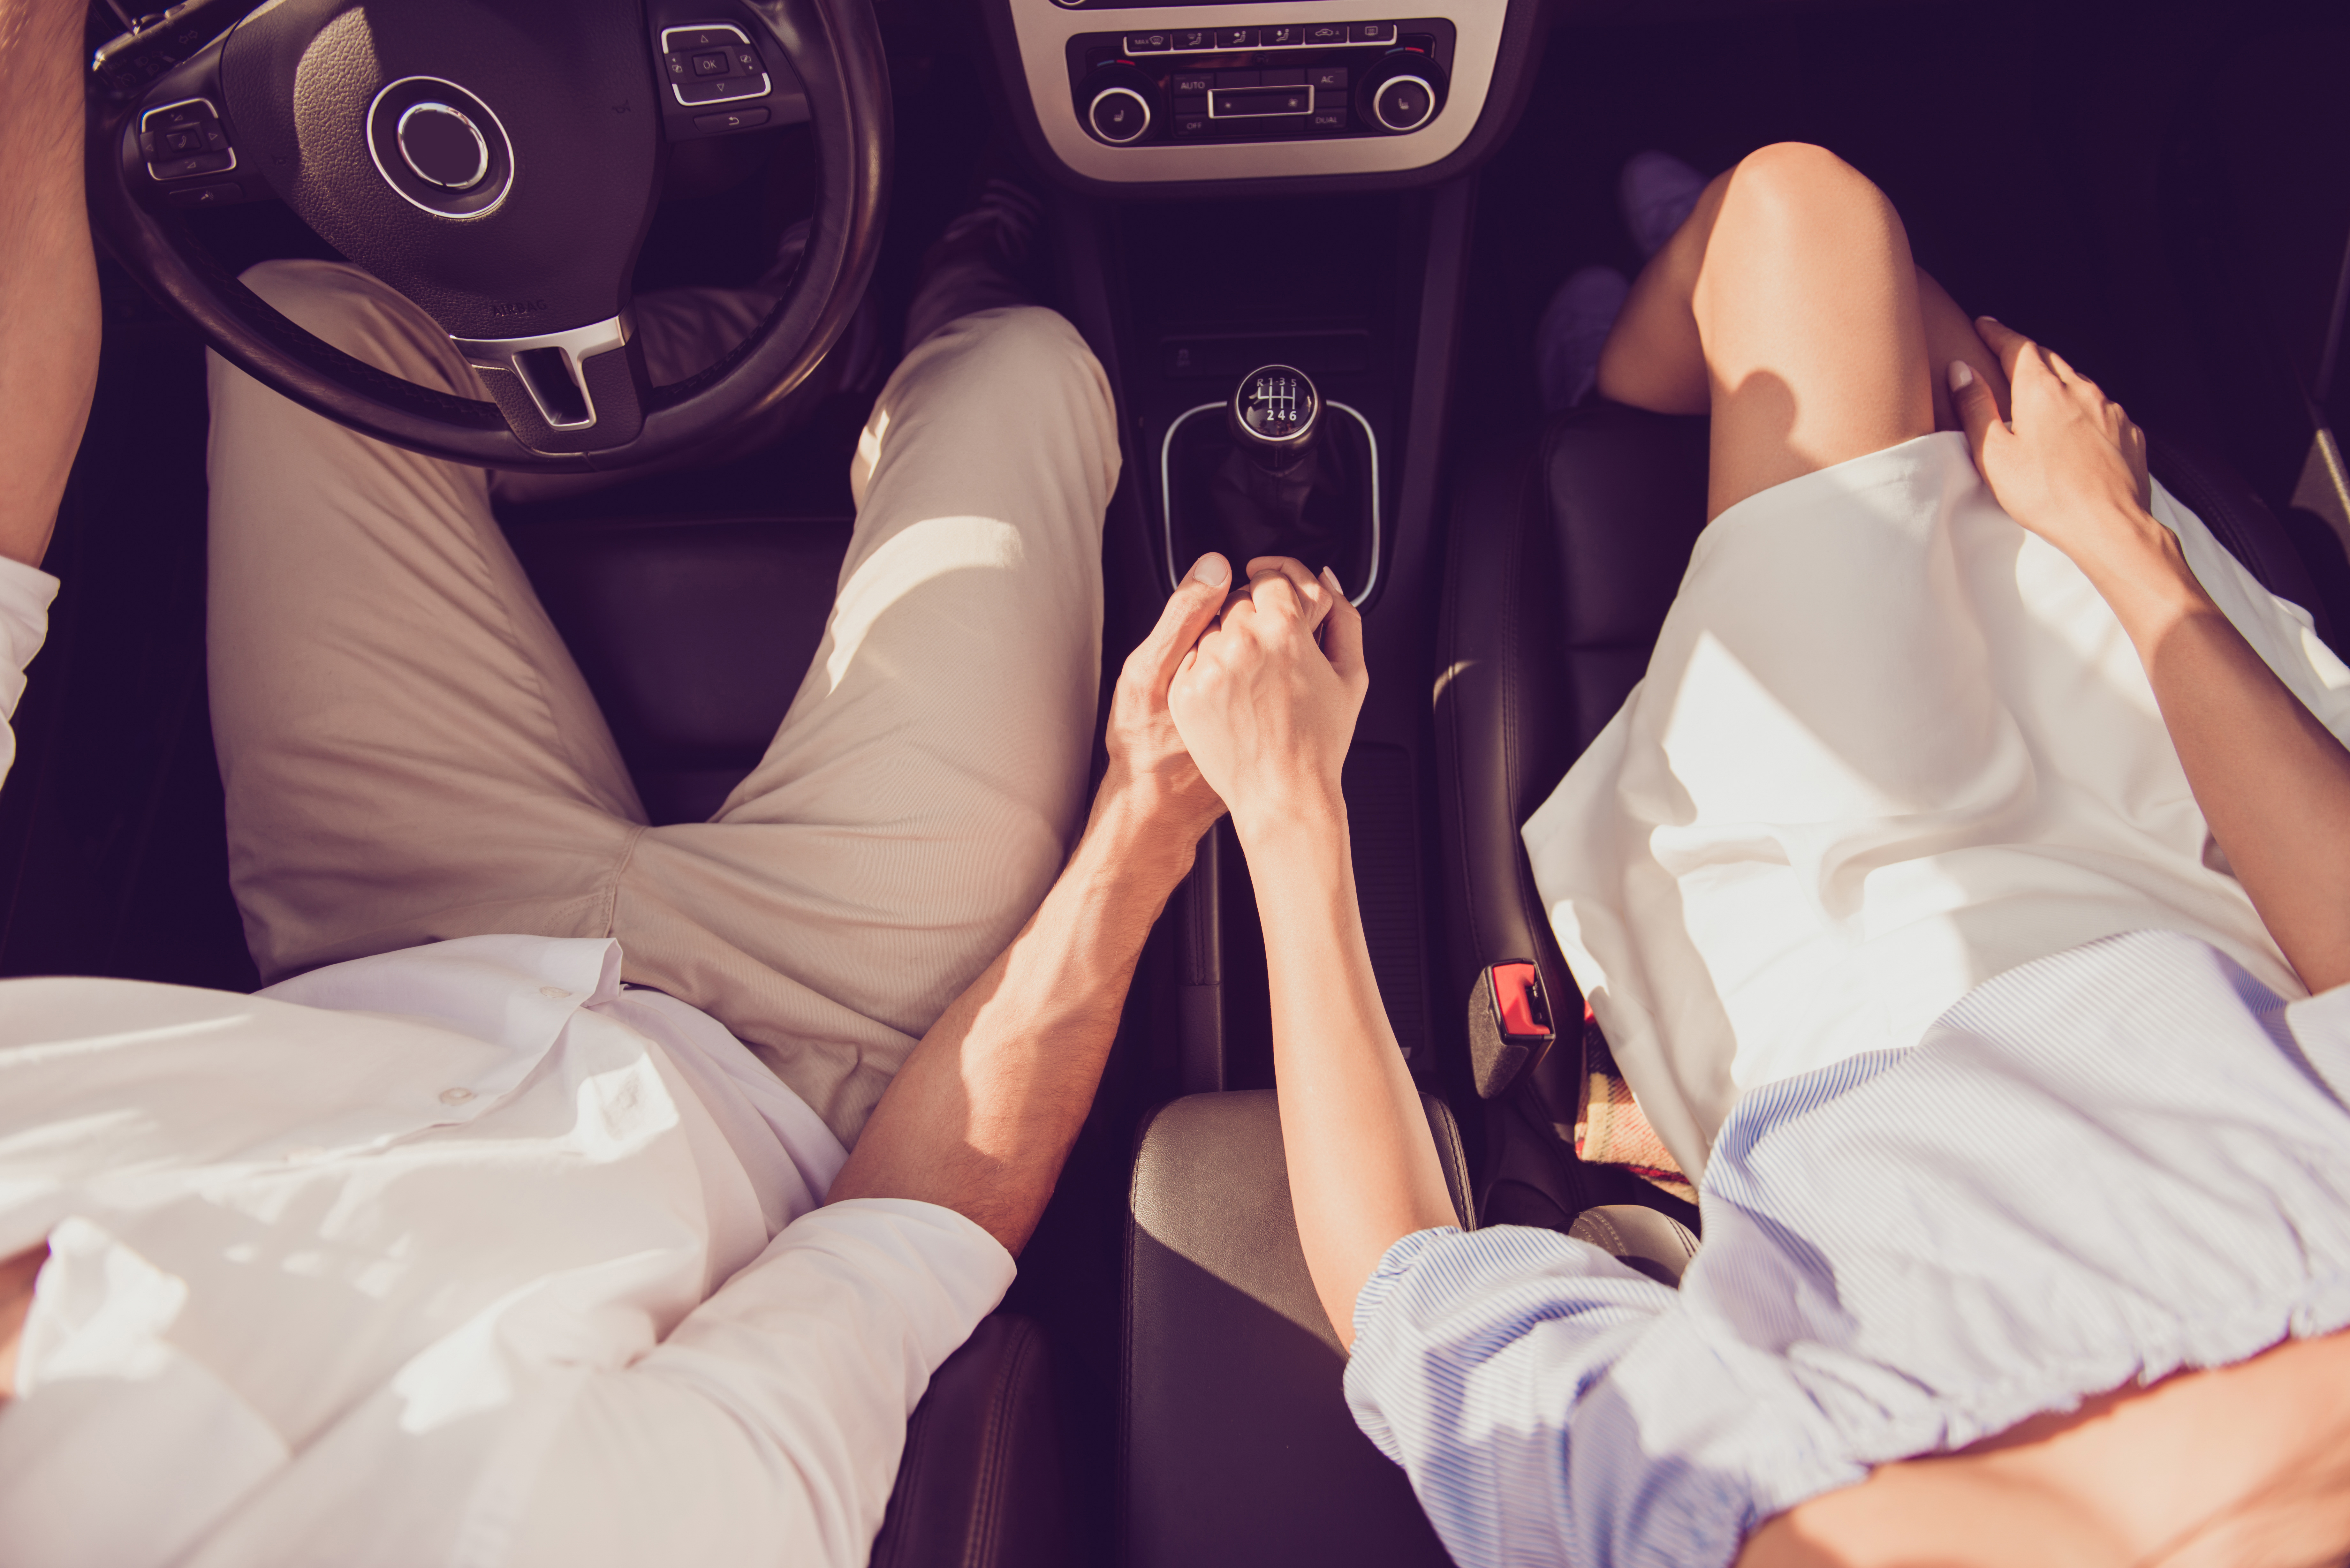 A couple holding hands in a car | Source: Shutterstock